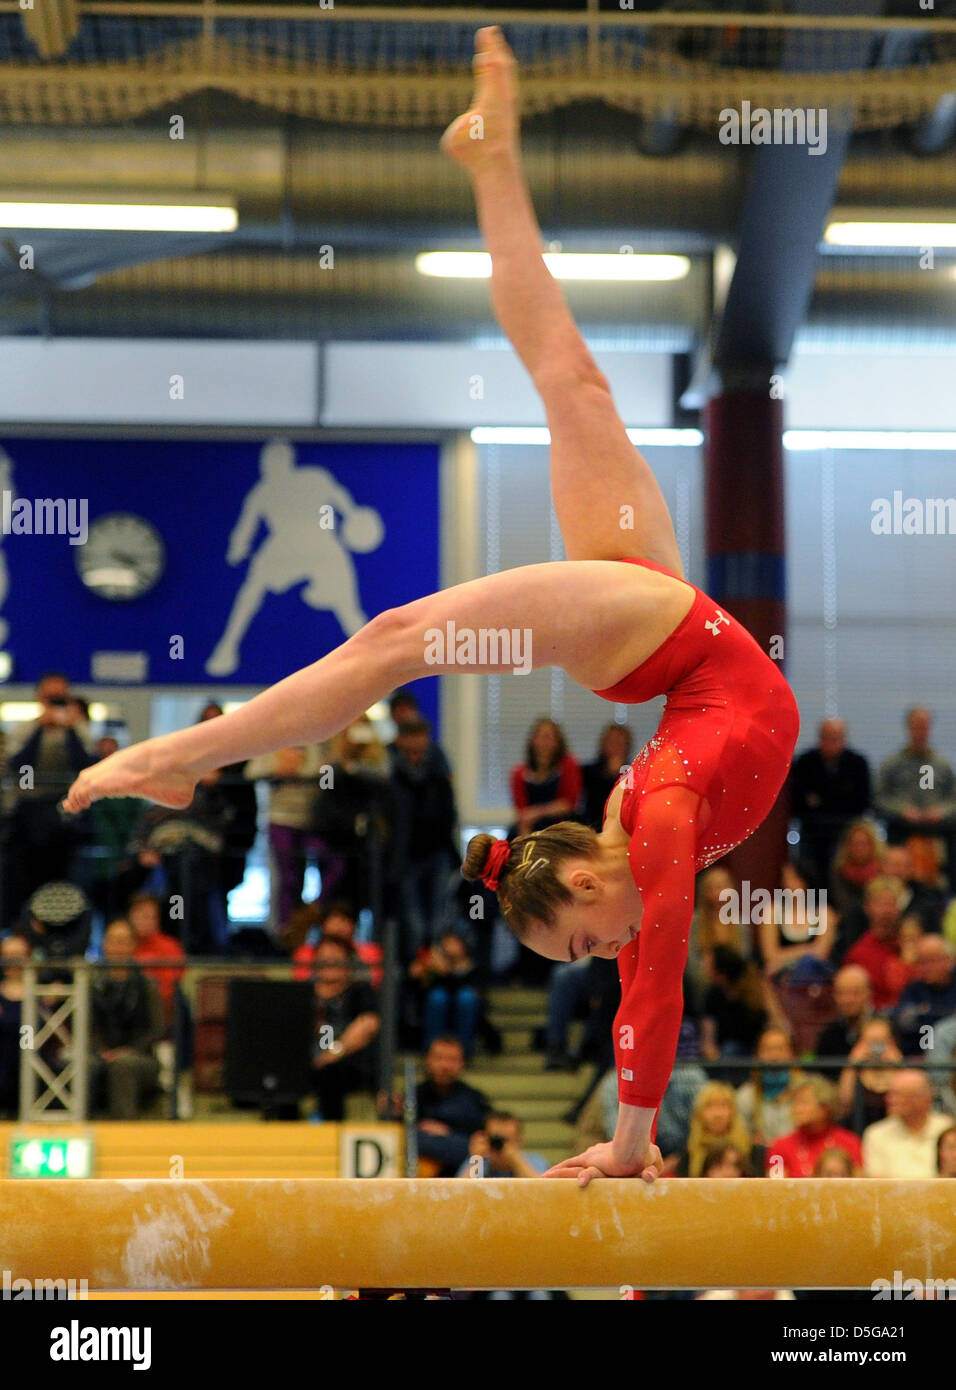 The US-American gymnast Peyton Ernst on the balance beam at an international gymnastics competition at the Richard-Hartmann-Halle in Chemnitz, Germany, 30 March 2013. Photo: Thomas Eisenhuth Stock Photo